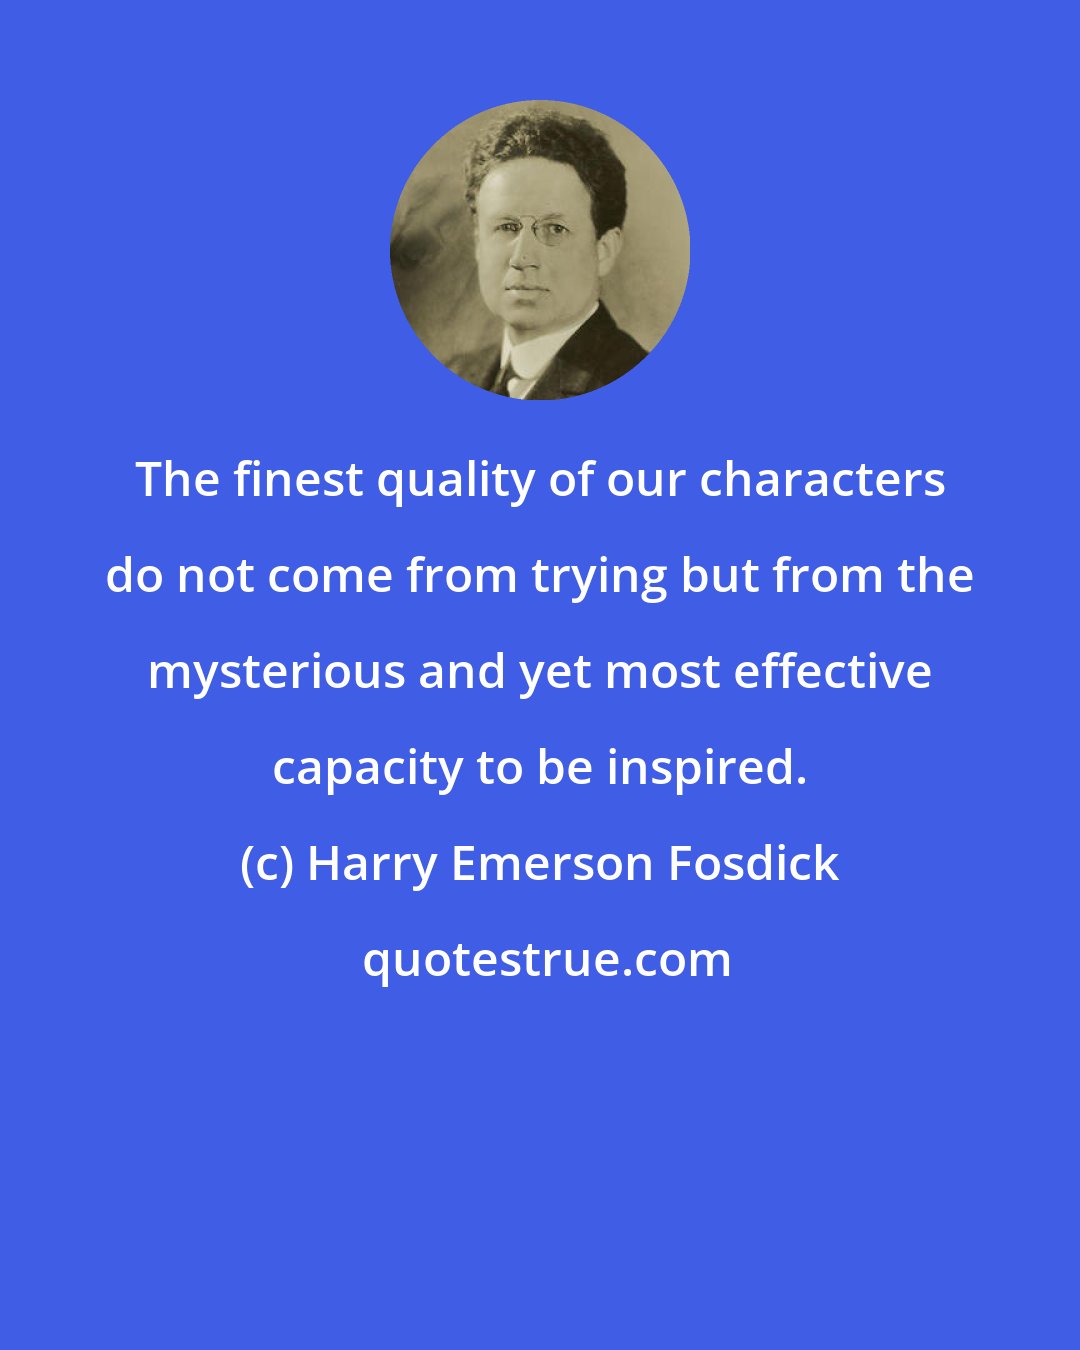 Harry Emerson Fosdick: The finest quality of our characters do not come from trying but from the mysterious and yet most effective capacity to be inspired.